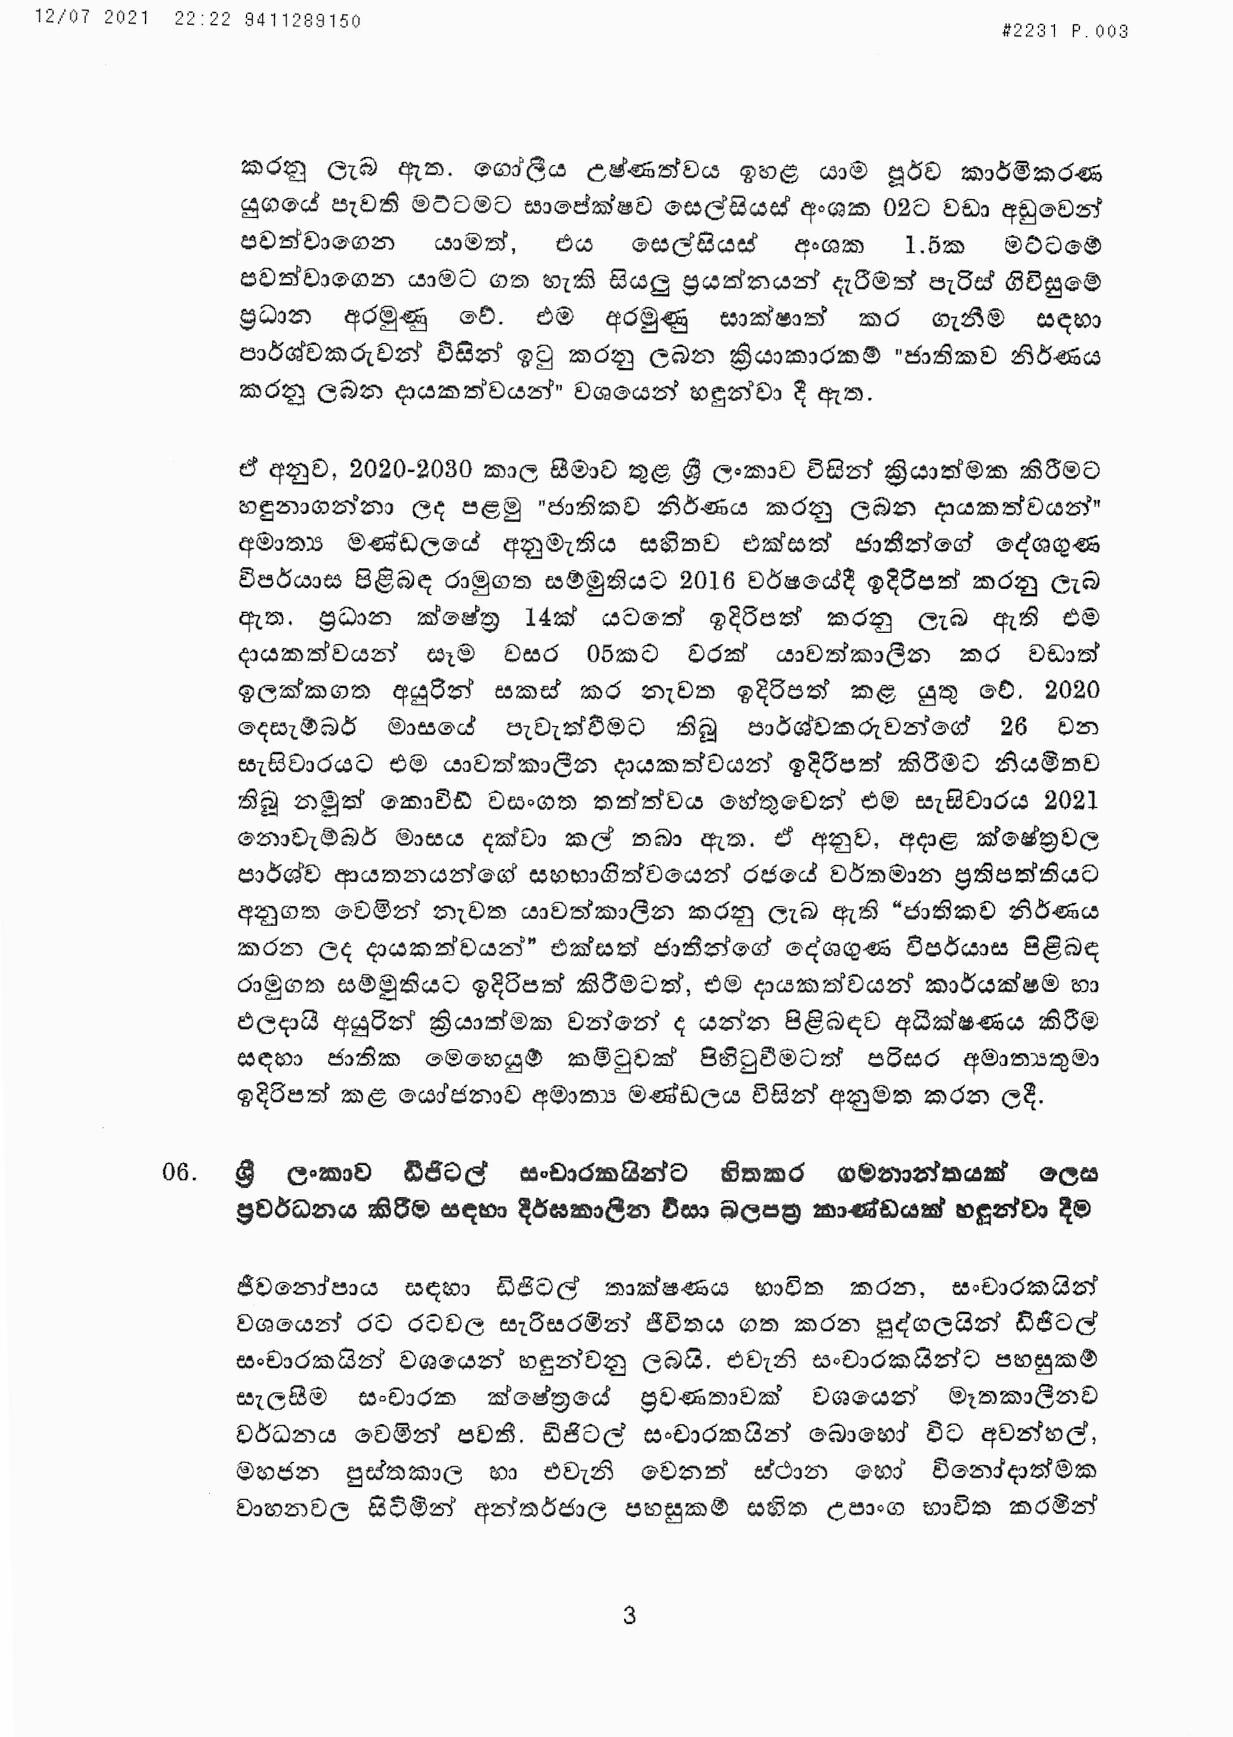 Cabinet Decision on 12.07.2021 page 003